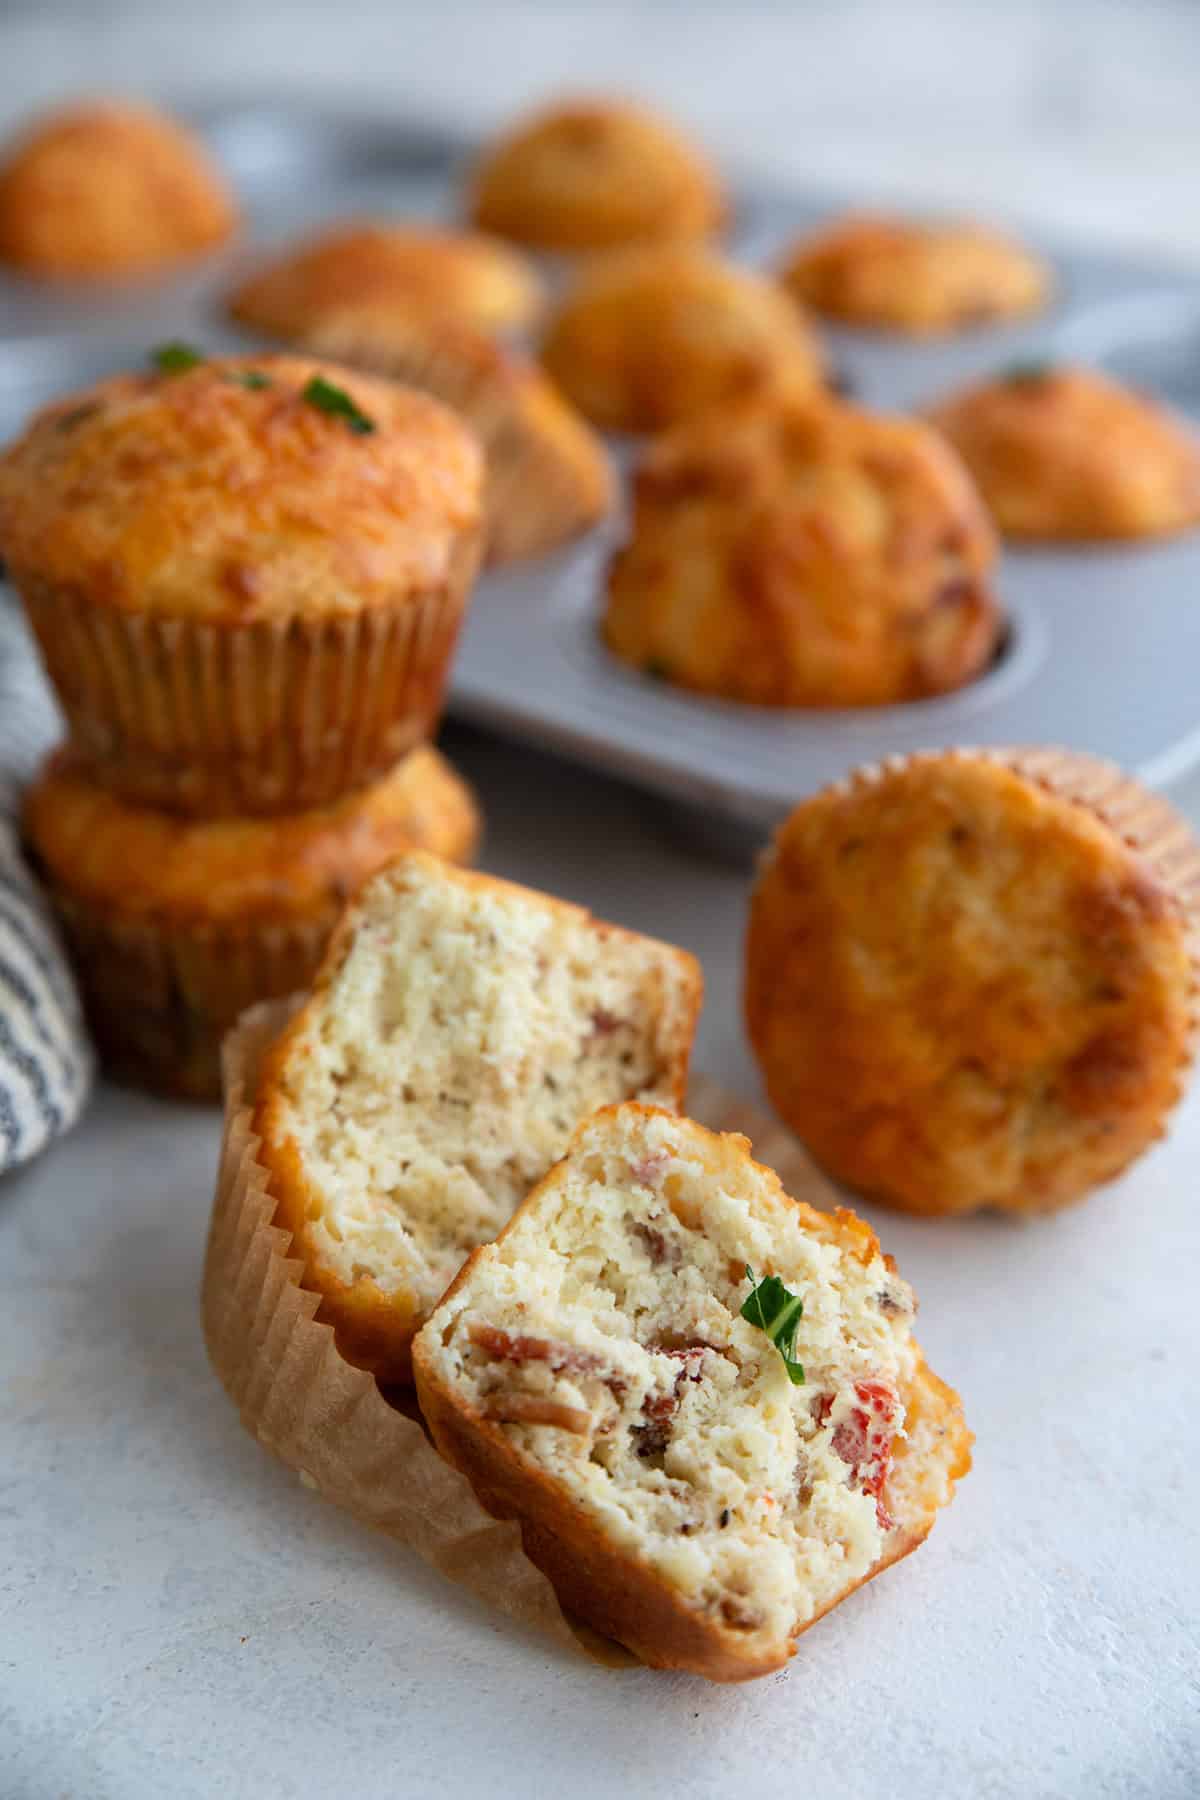 A low carb cottage cheese muffin broken open on a table, with more muffins in the background.